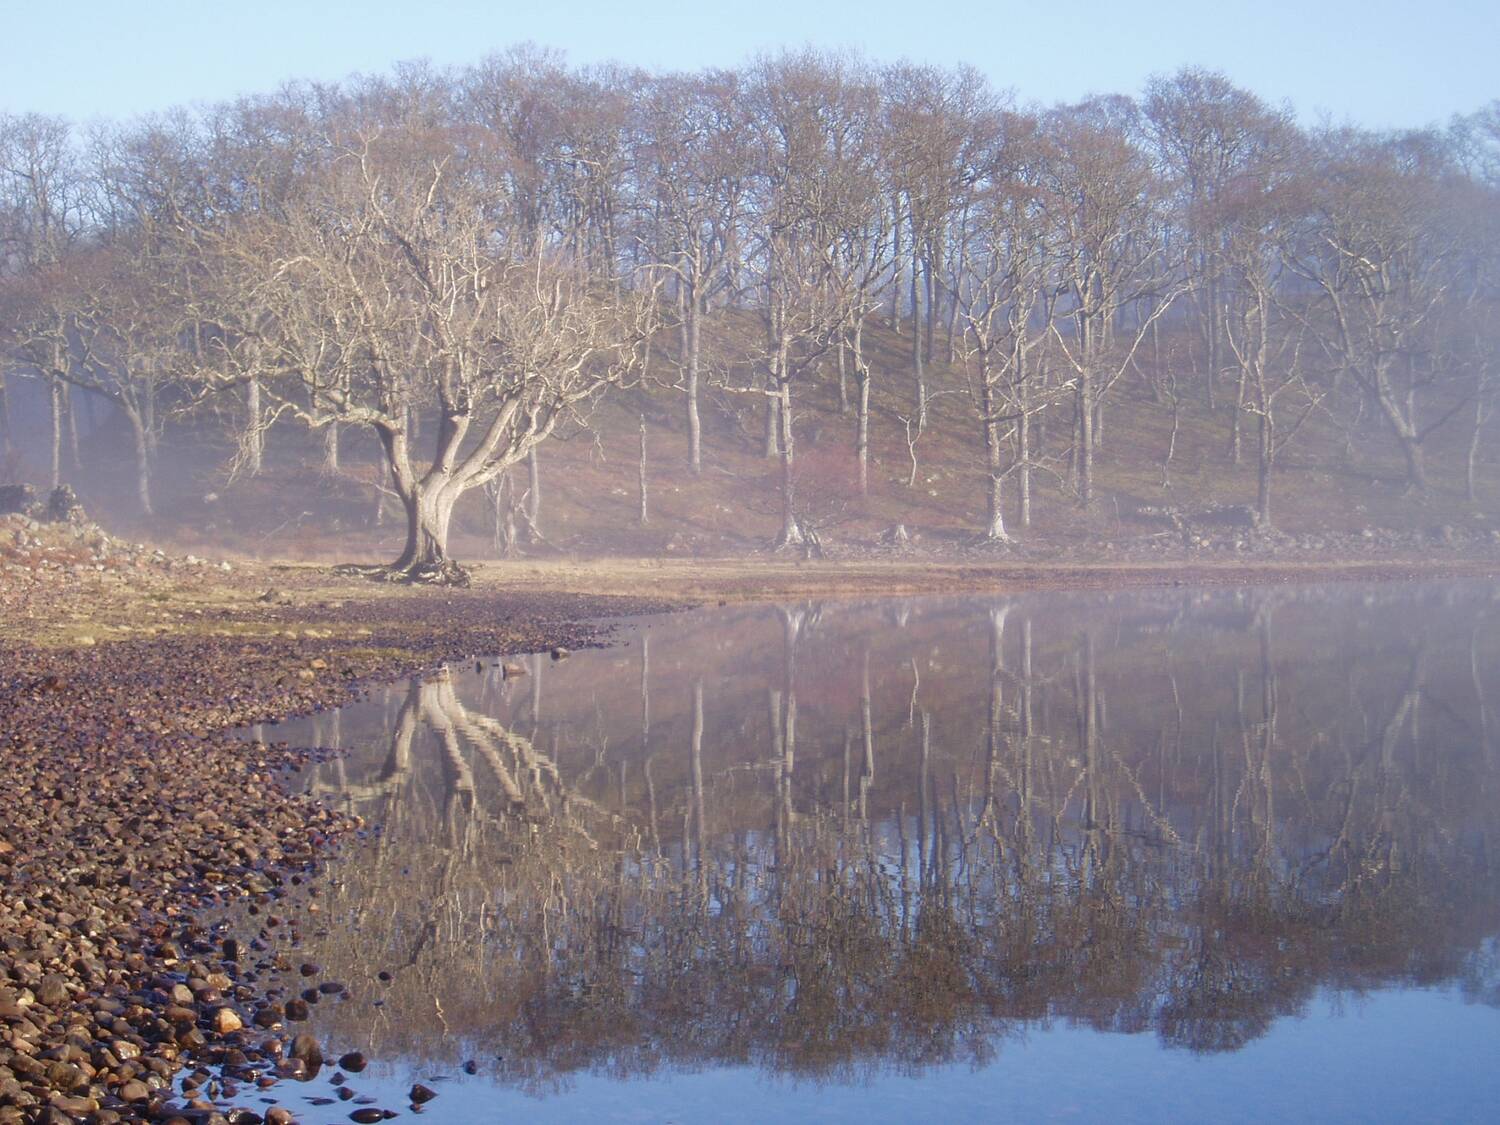  Bare-branched oak trees grown on a small hillside, with a loch at the bottom. The branches are clearly reflected in the still water against the blue sky.